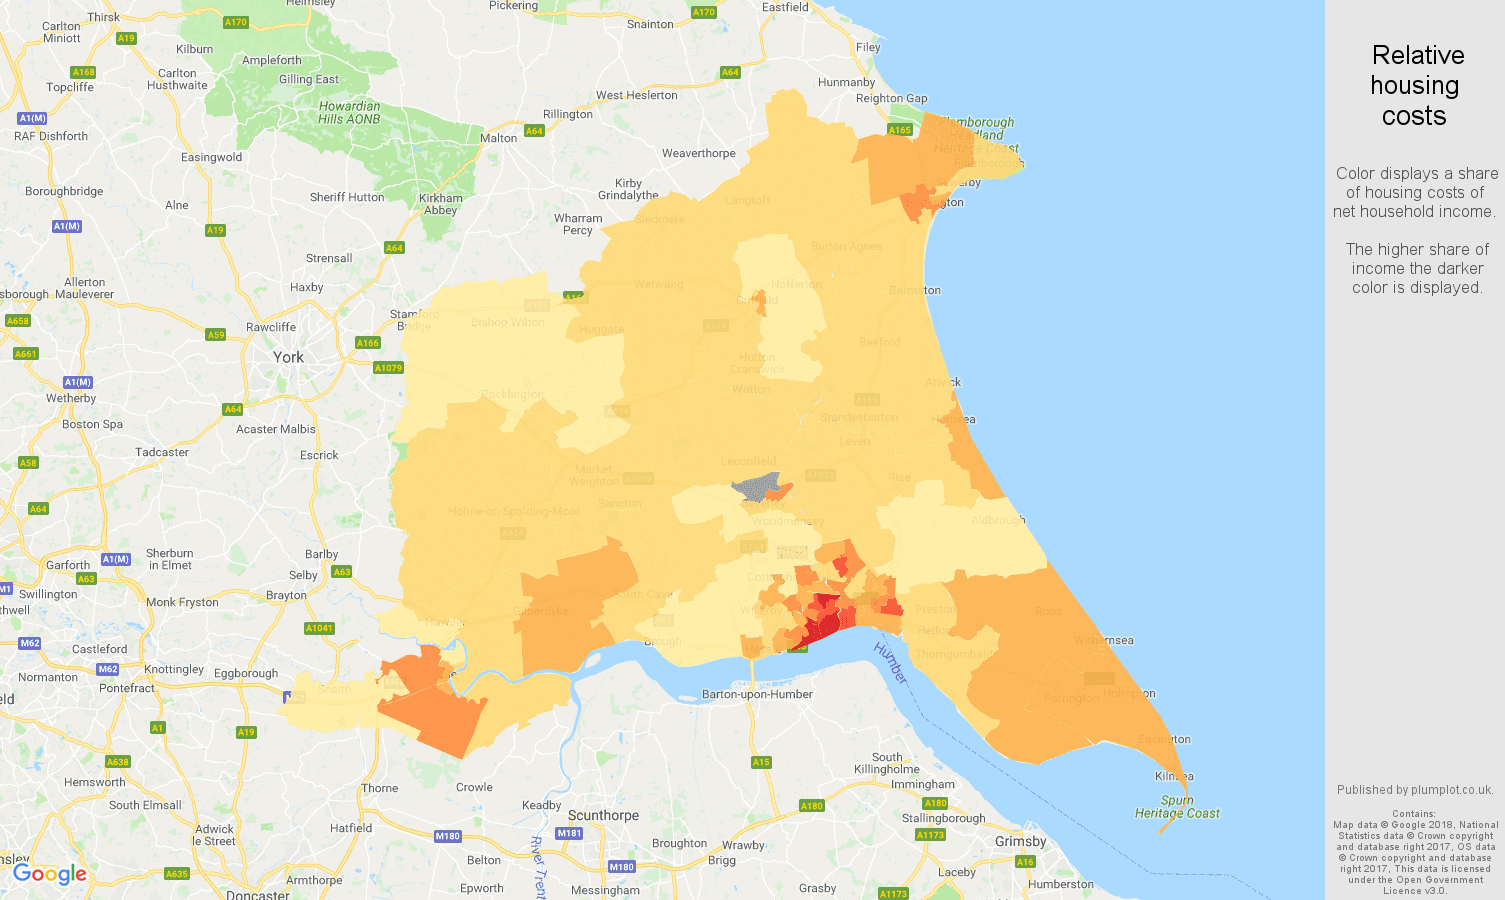 East Riding of Yorkshire relative housing costs map